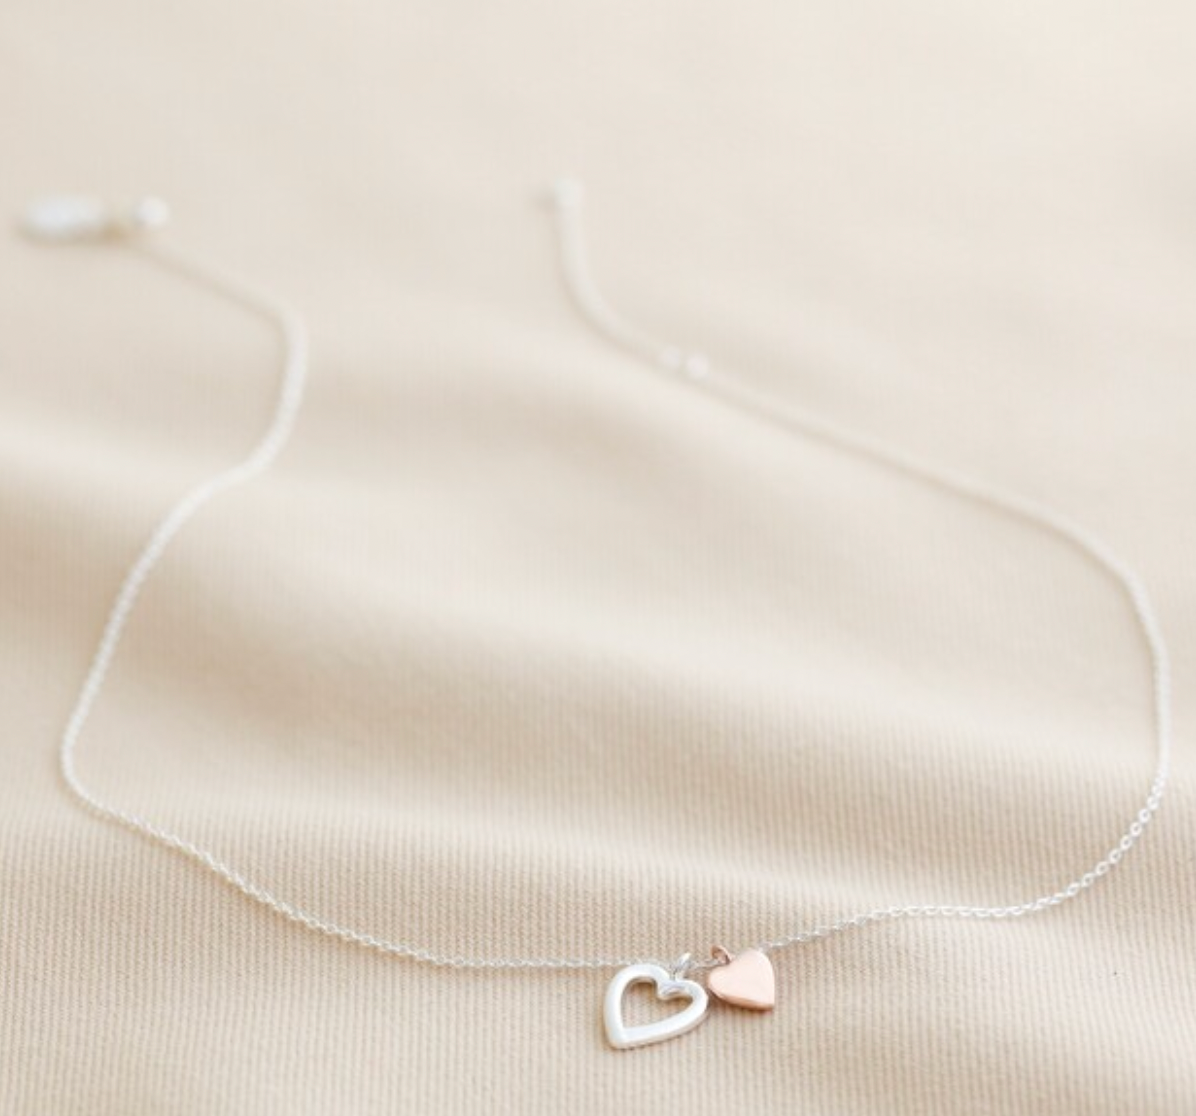 Mothers day gift rose gold and silver double heart pendant